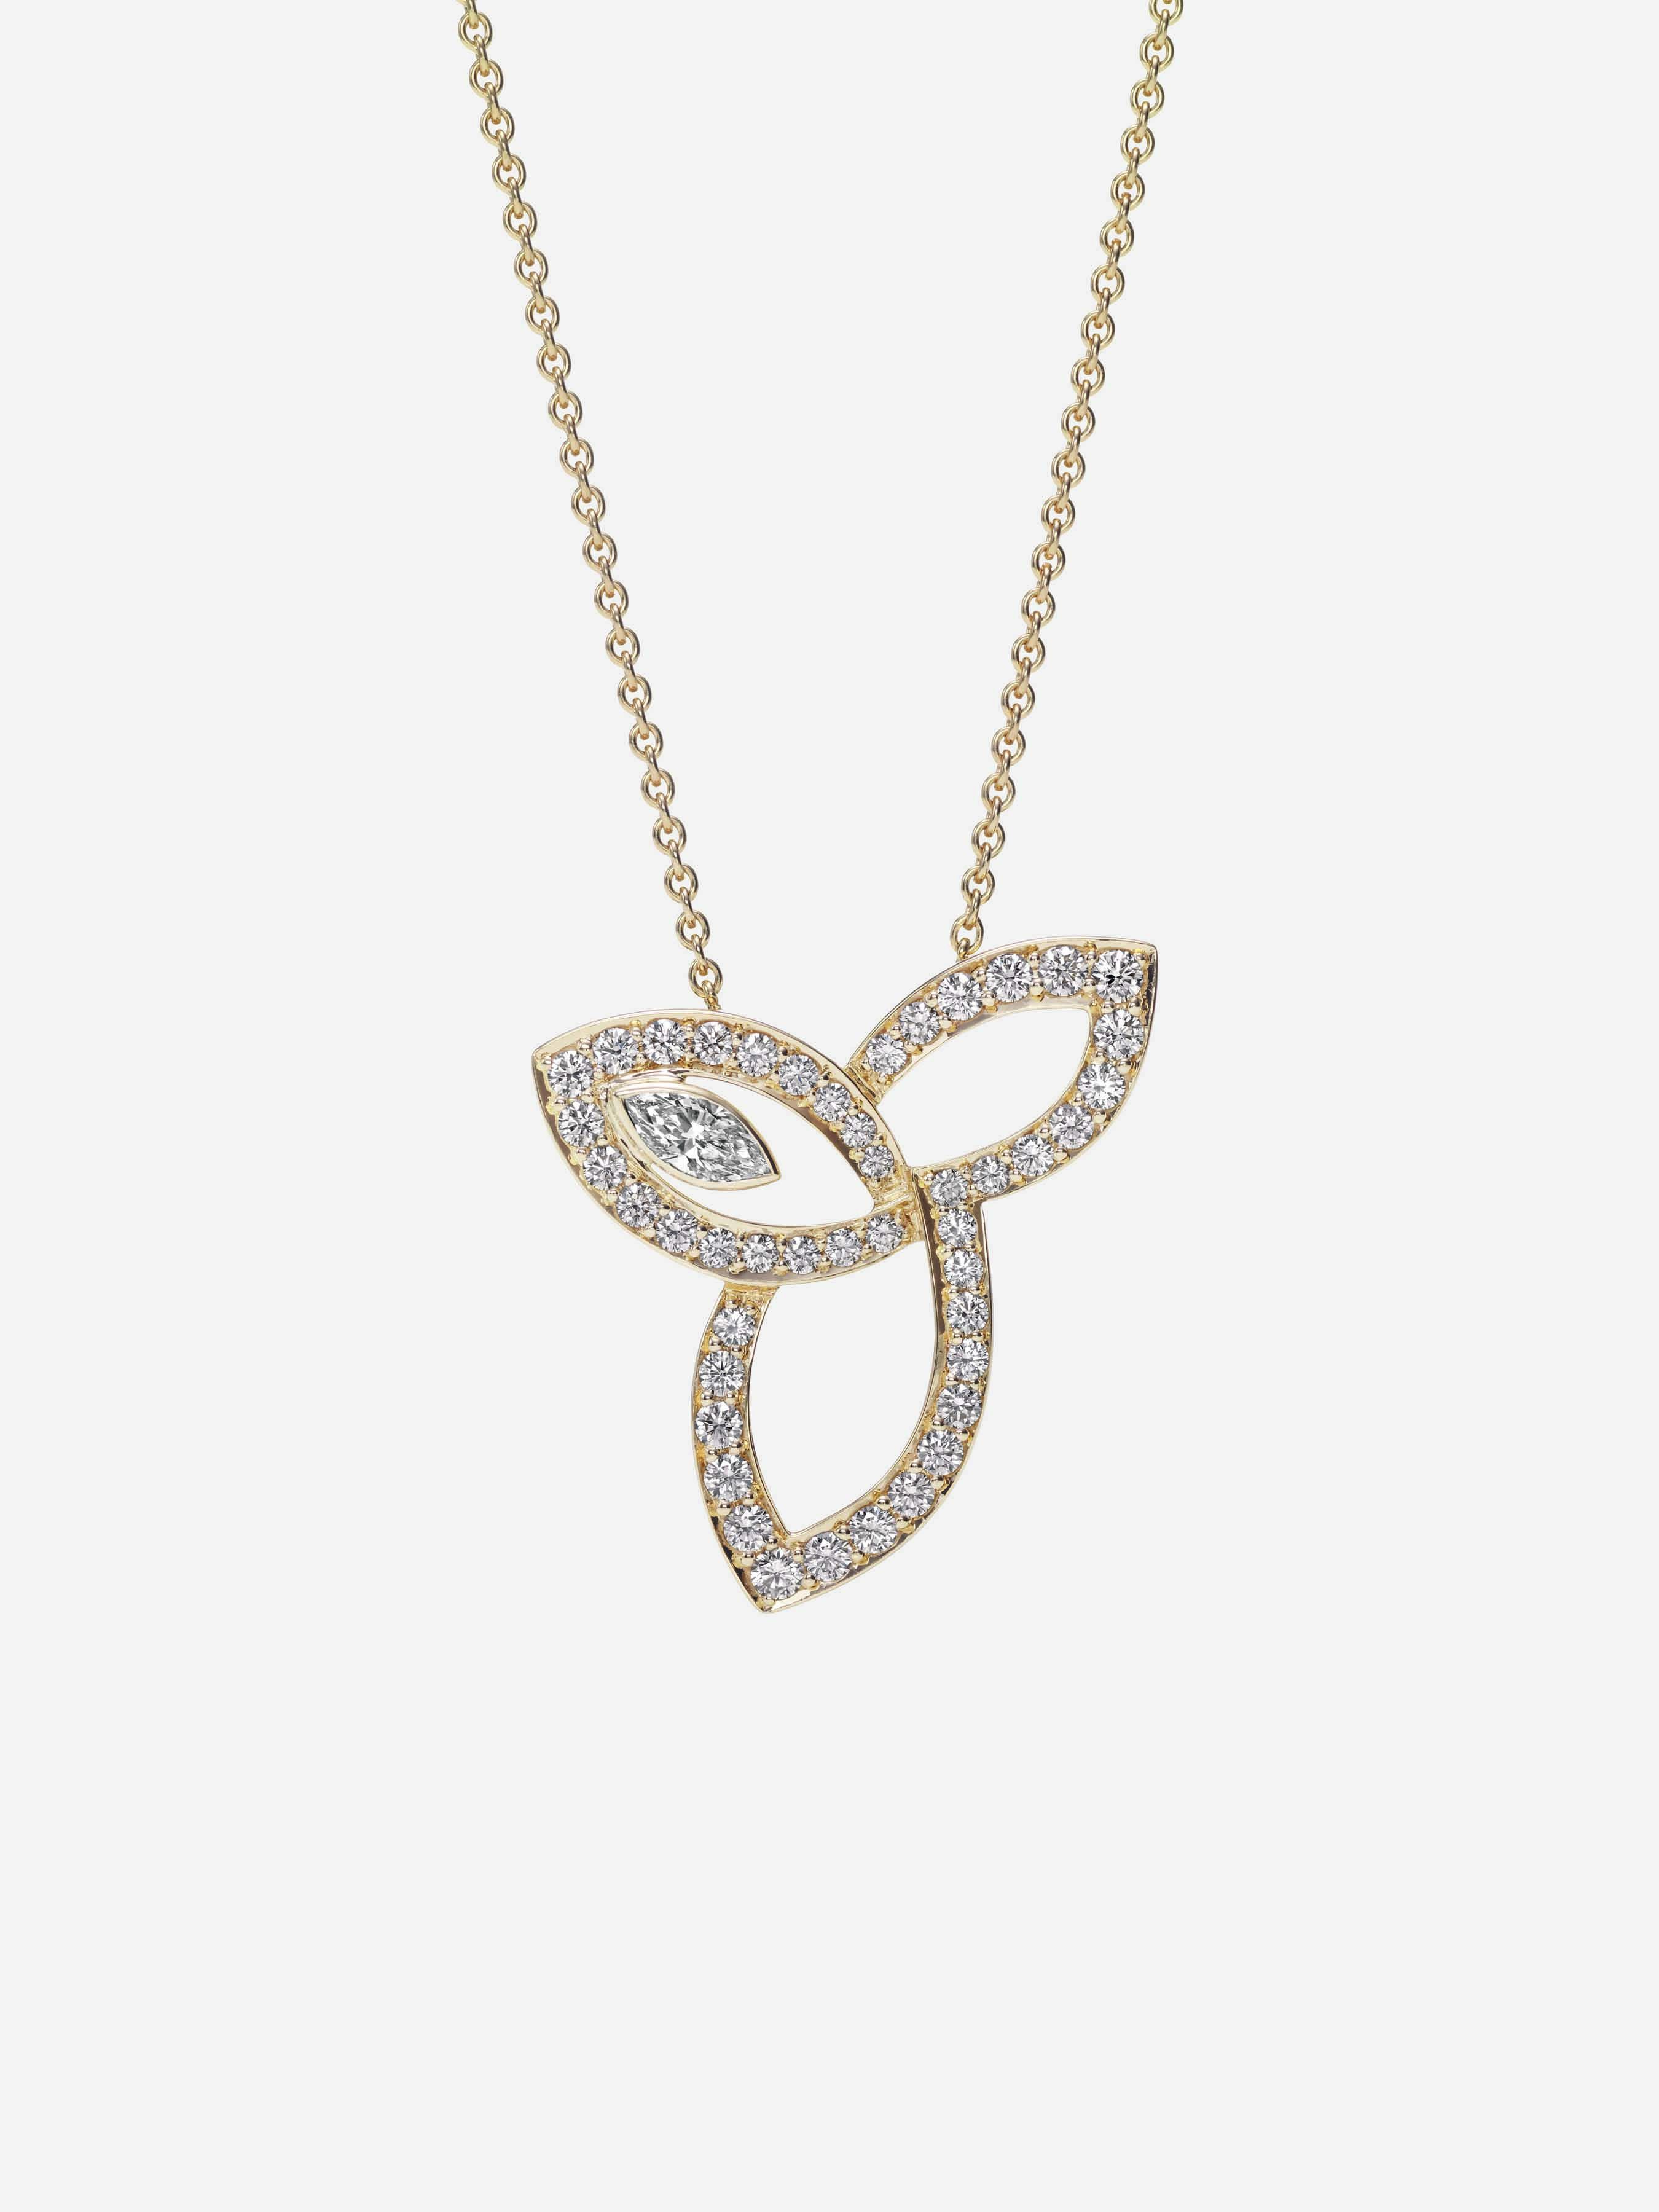 Lily_Cluster_Pendant_Yellow_Gold.jpg